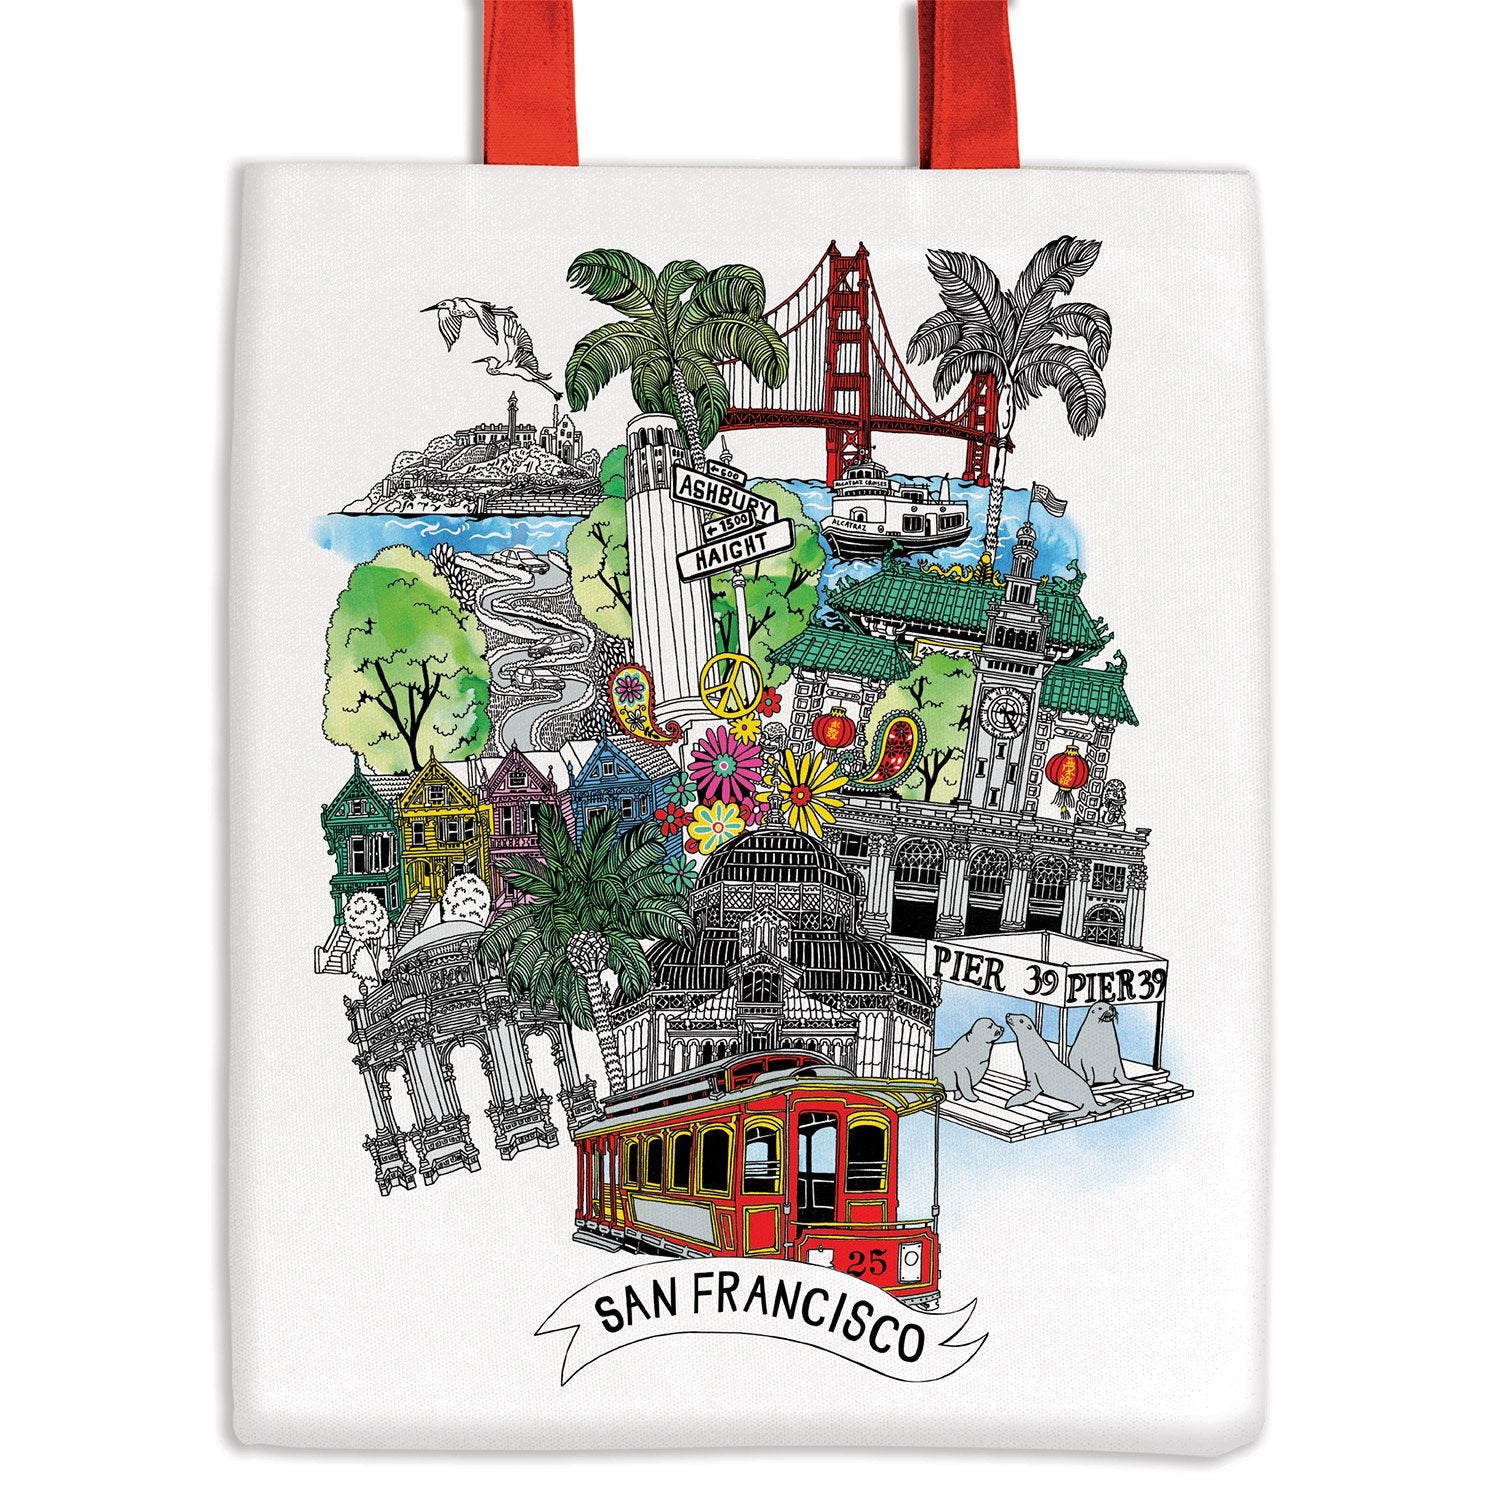 BAGAHOLICBOY SHOPS: 3 Tote Bags To Buy - Daily Battle, Neverfull & Saint  Louis - BAGAHOLICBOY